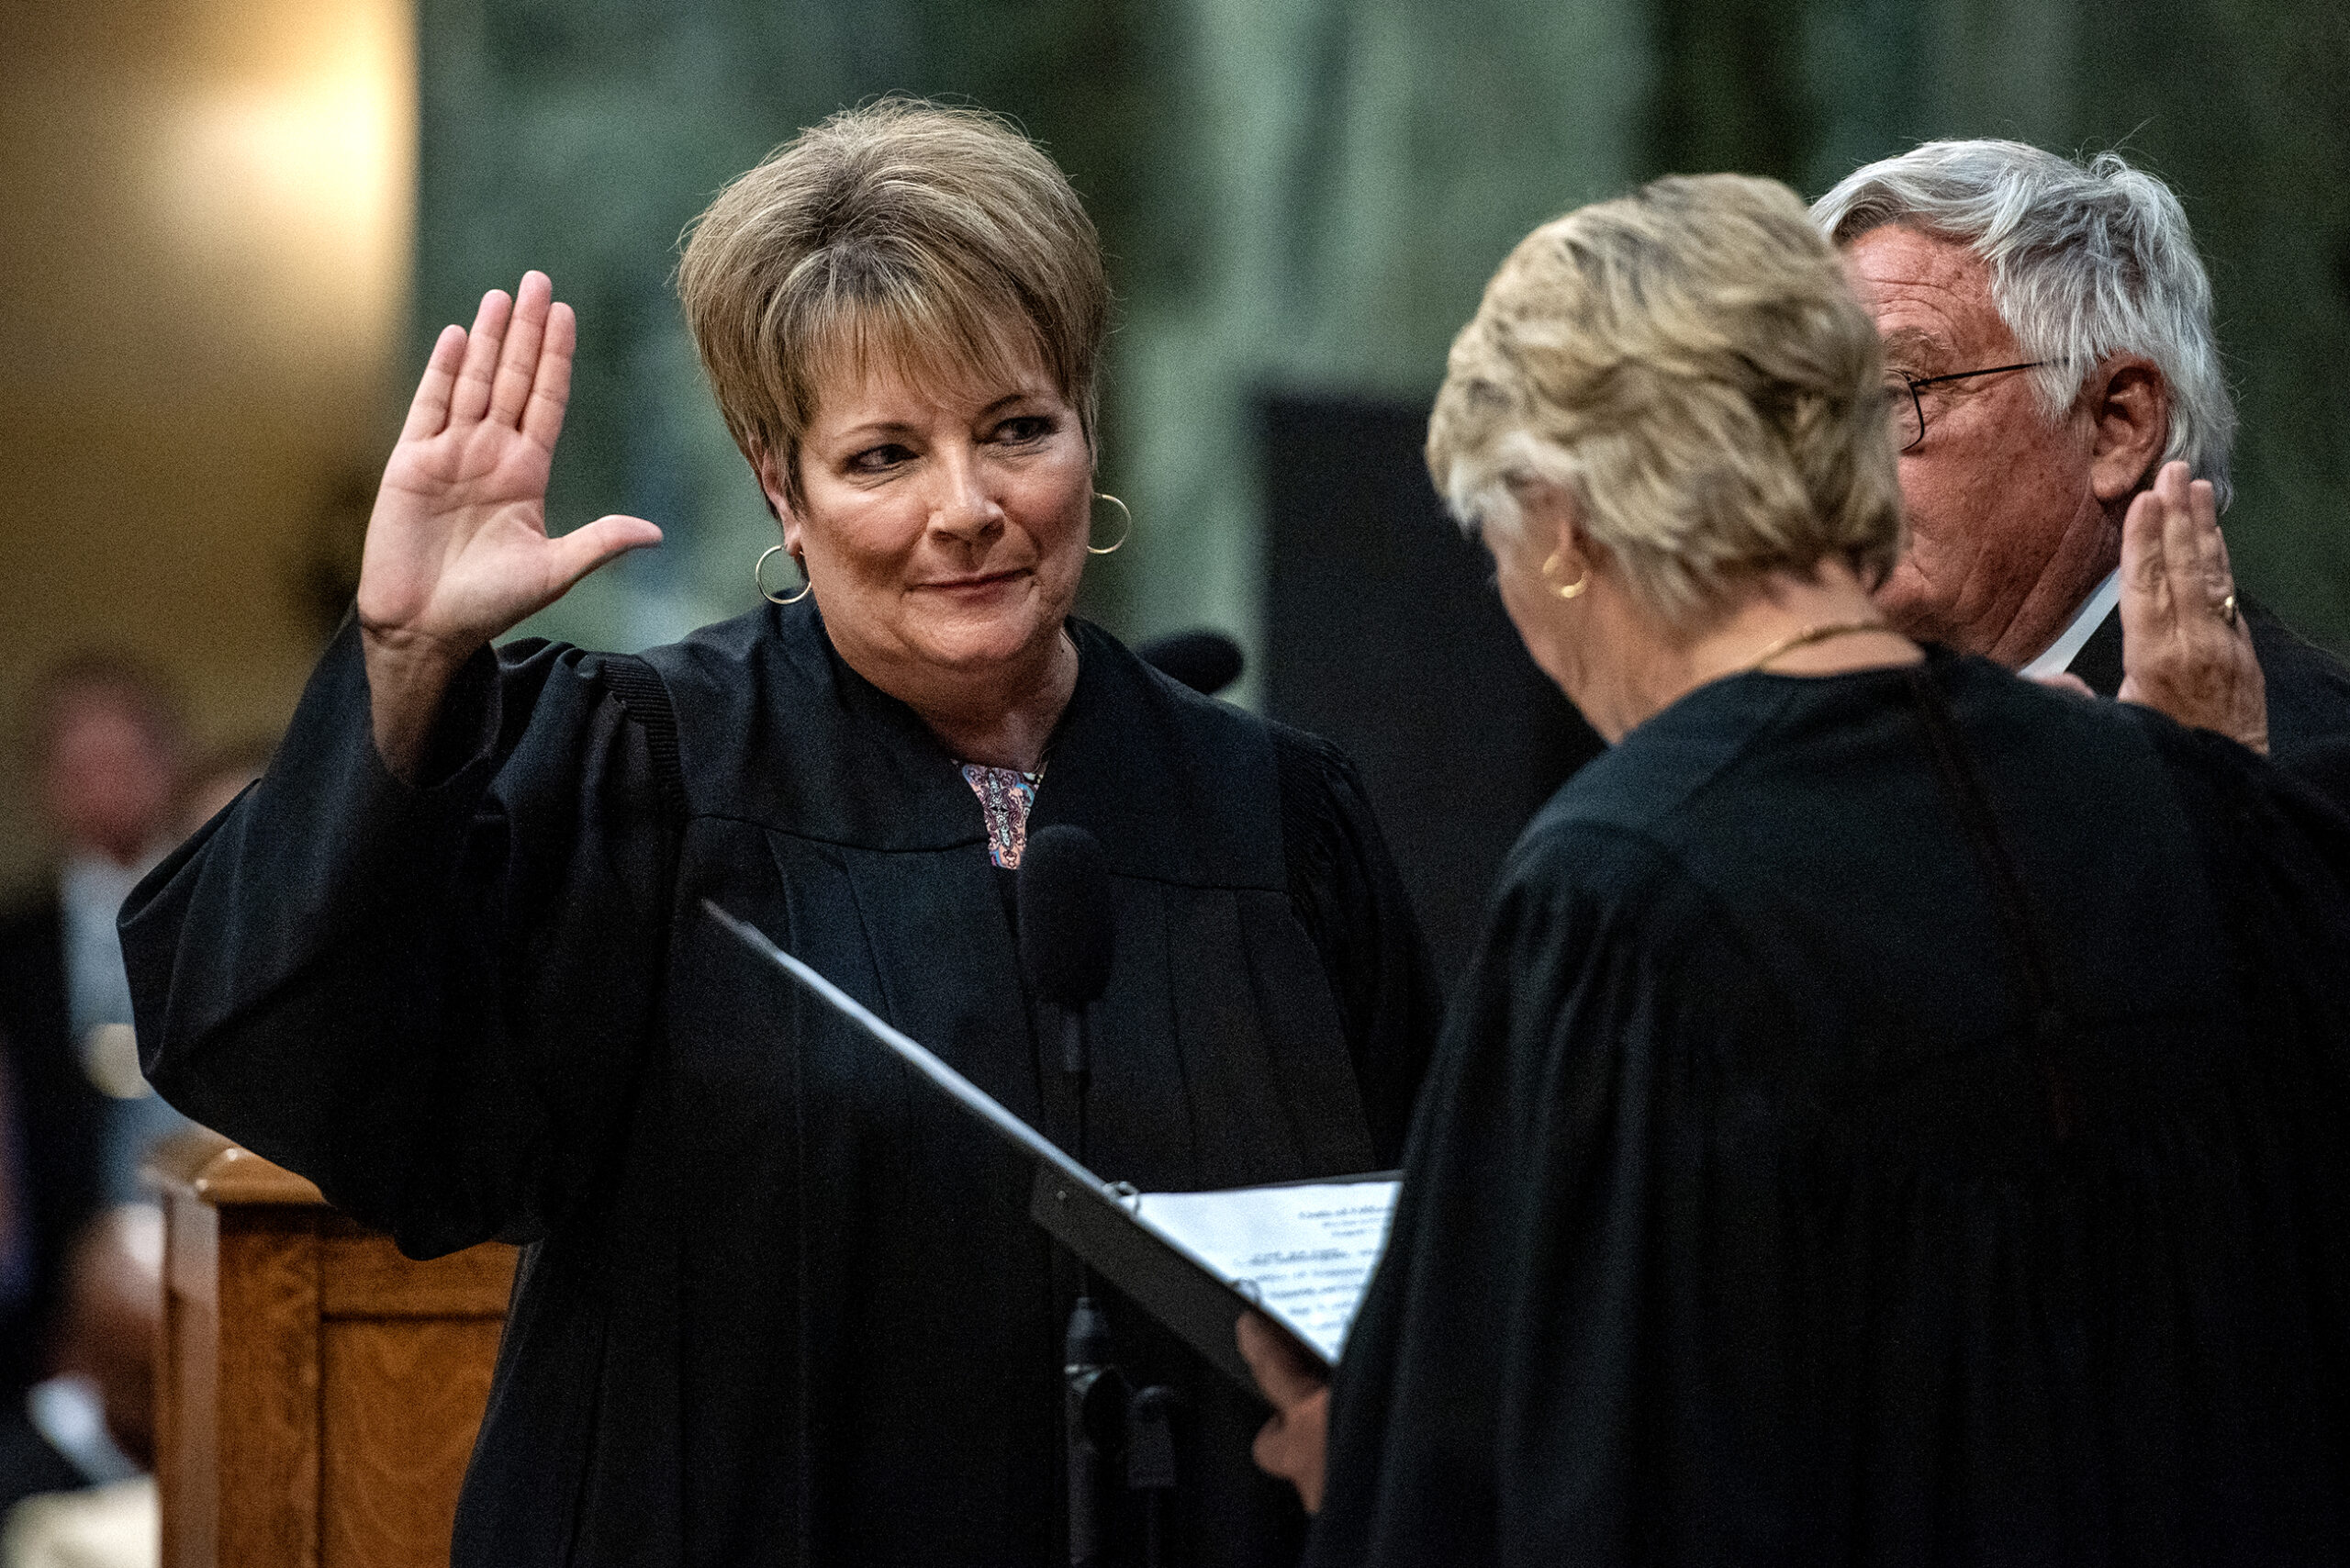 Janet Protasiewicz raises her hand to swear in.